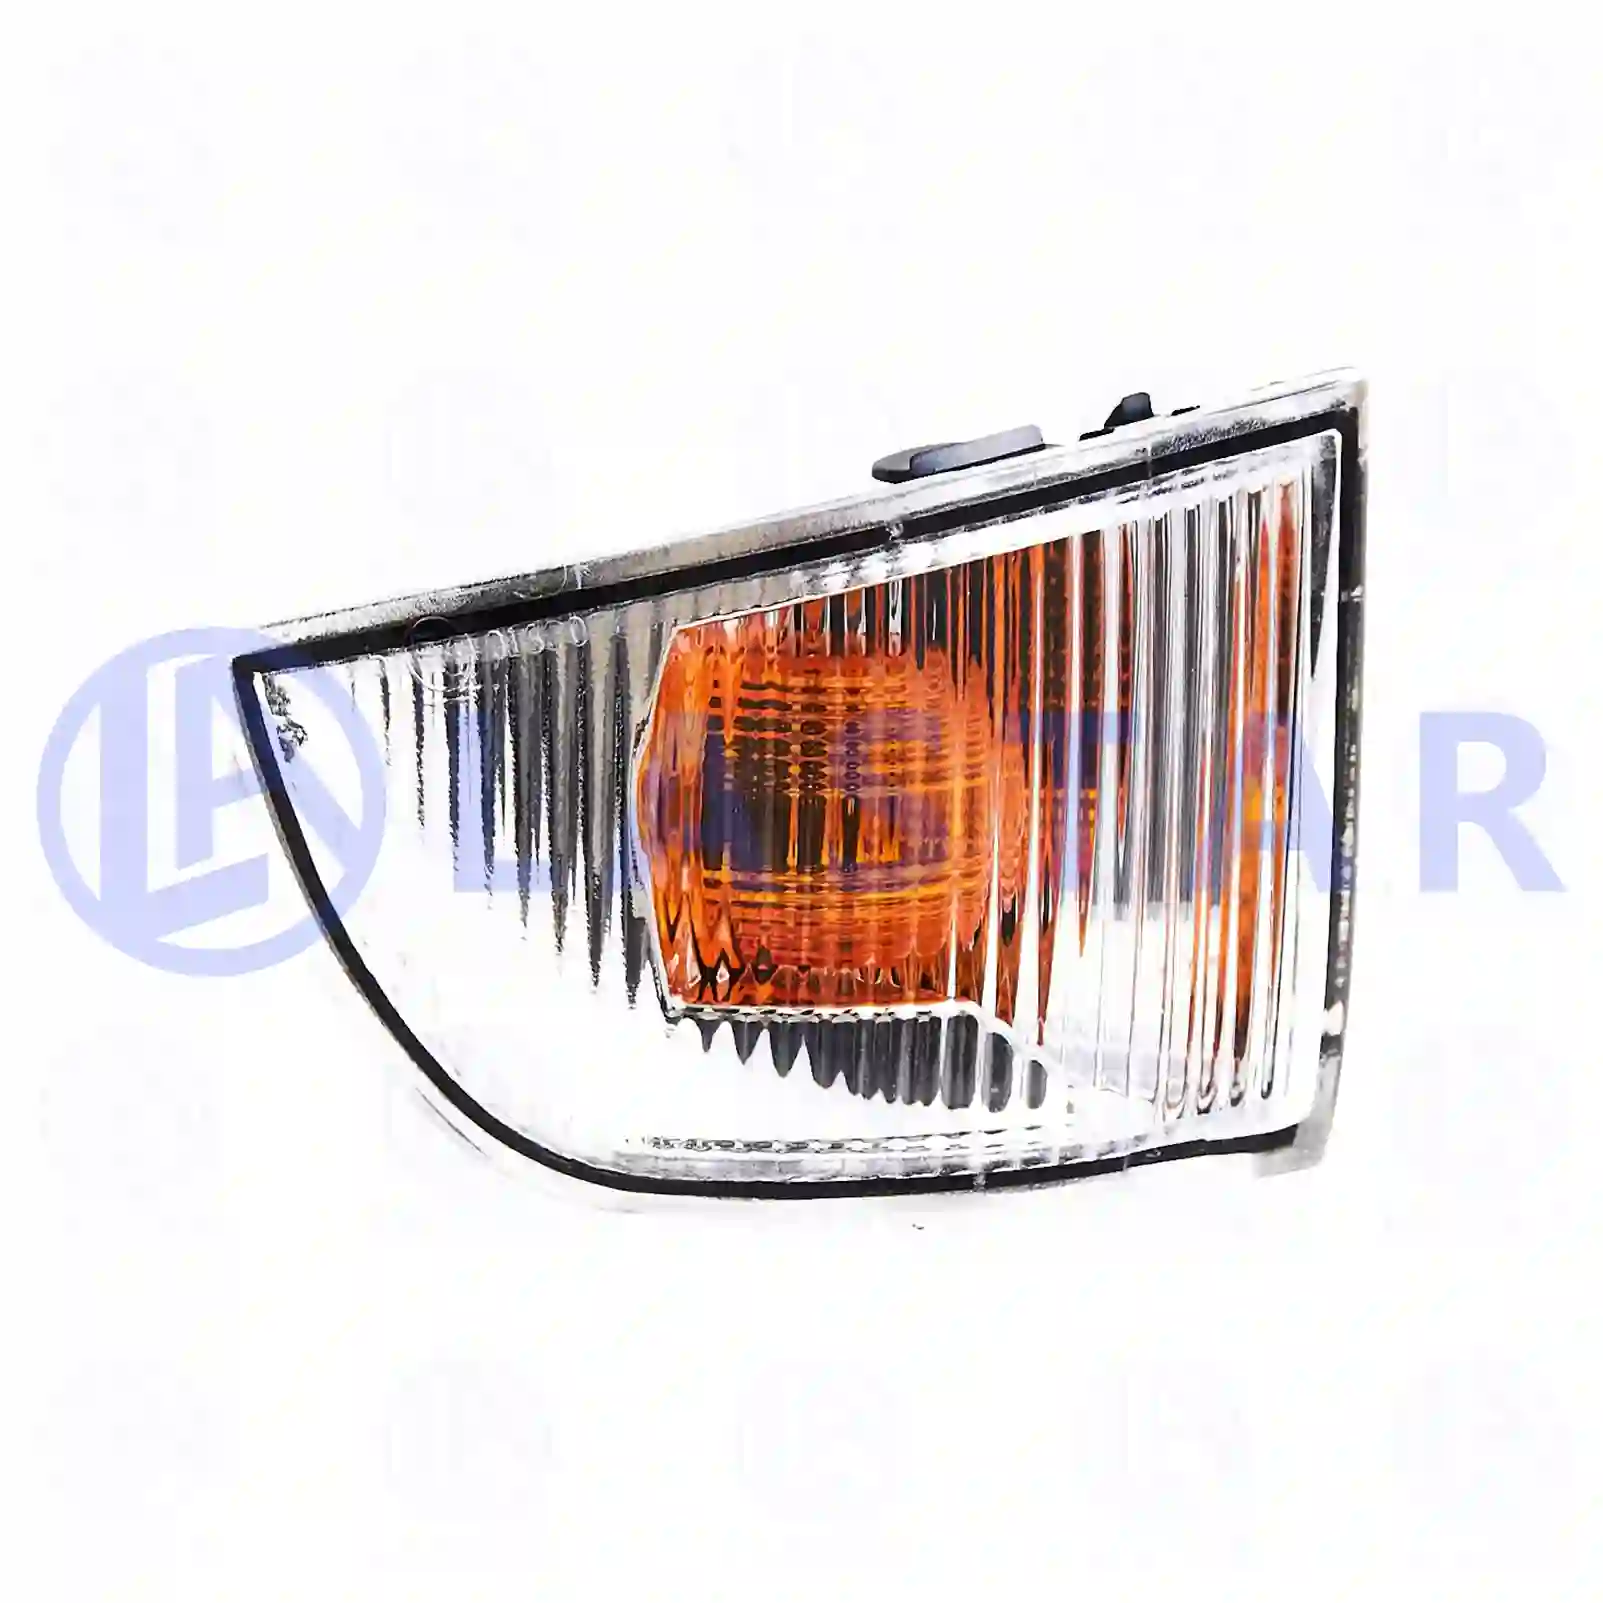 Turn signal lamp, left, without lamp carrier, 77712952, 03801914, 3801914, ZG21199-0008 ||  77712952 Lastar Spare Part | Truck Spare Parts, Auotomotive Spare Parts Turn signal lamp, left, without lamp carrier, 77712952, 03801914, 3801914, ZG21199-0008 ||  77712952 Lastar Spare Part | Truck Spare Parts, Auotomotive Spare Parts